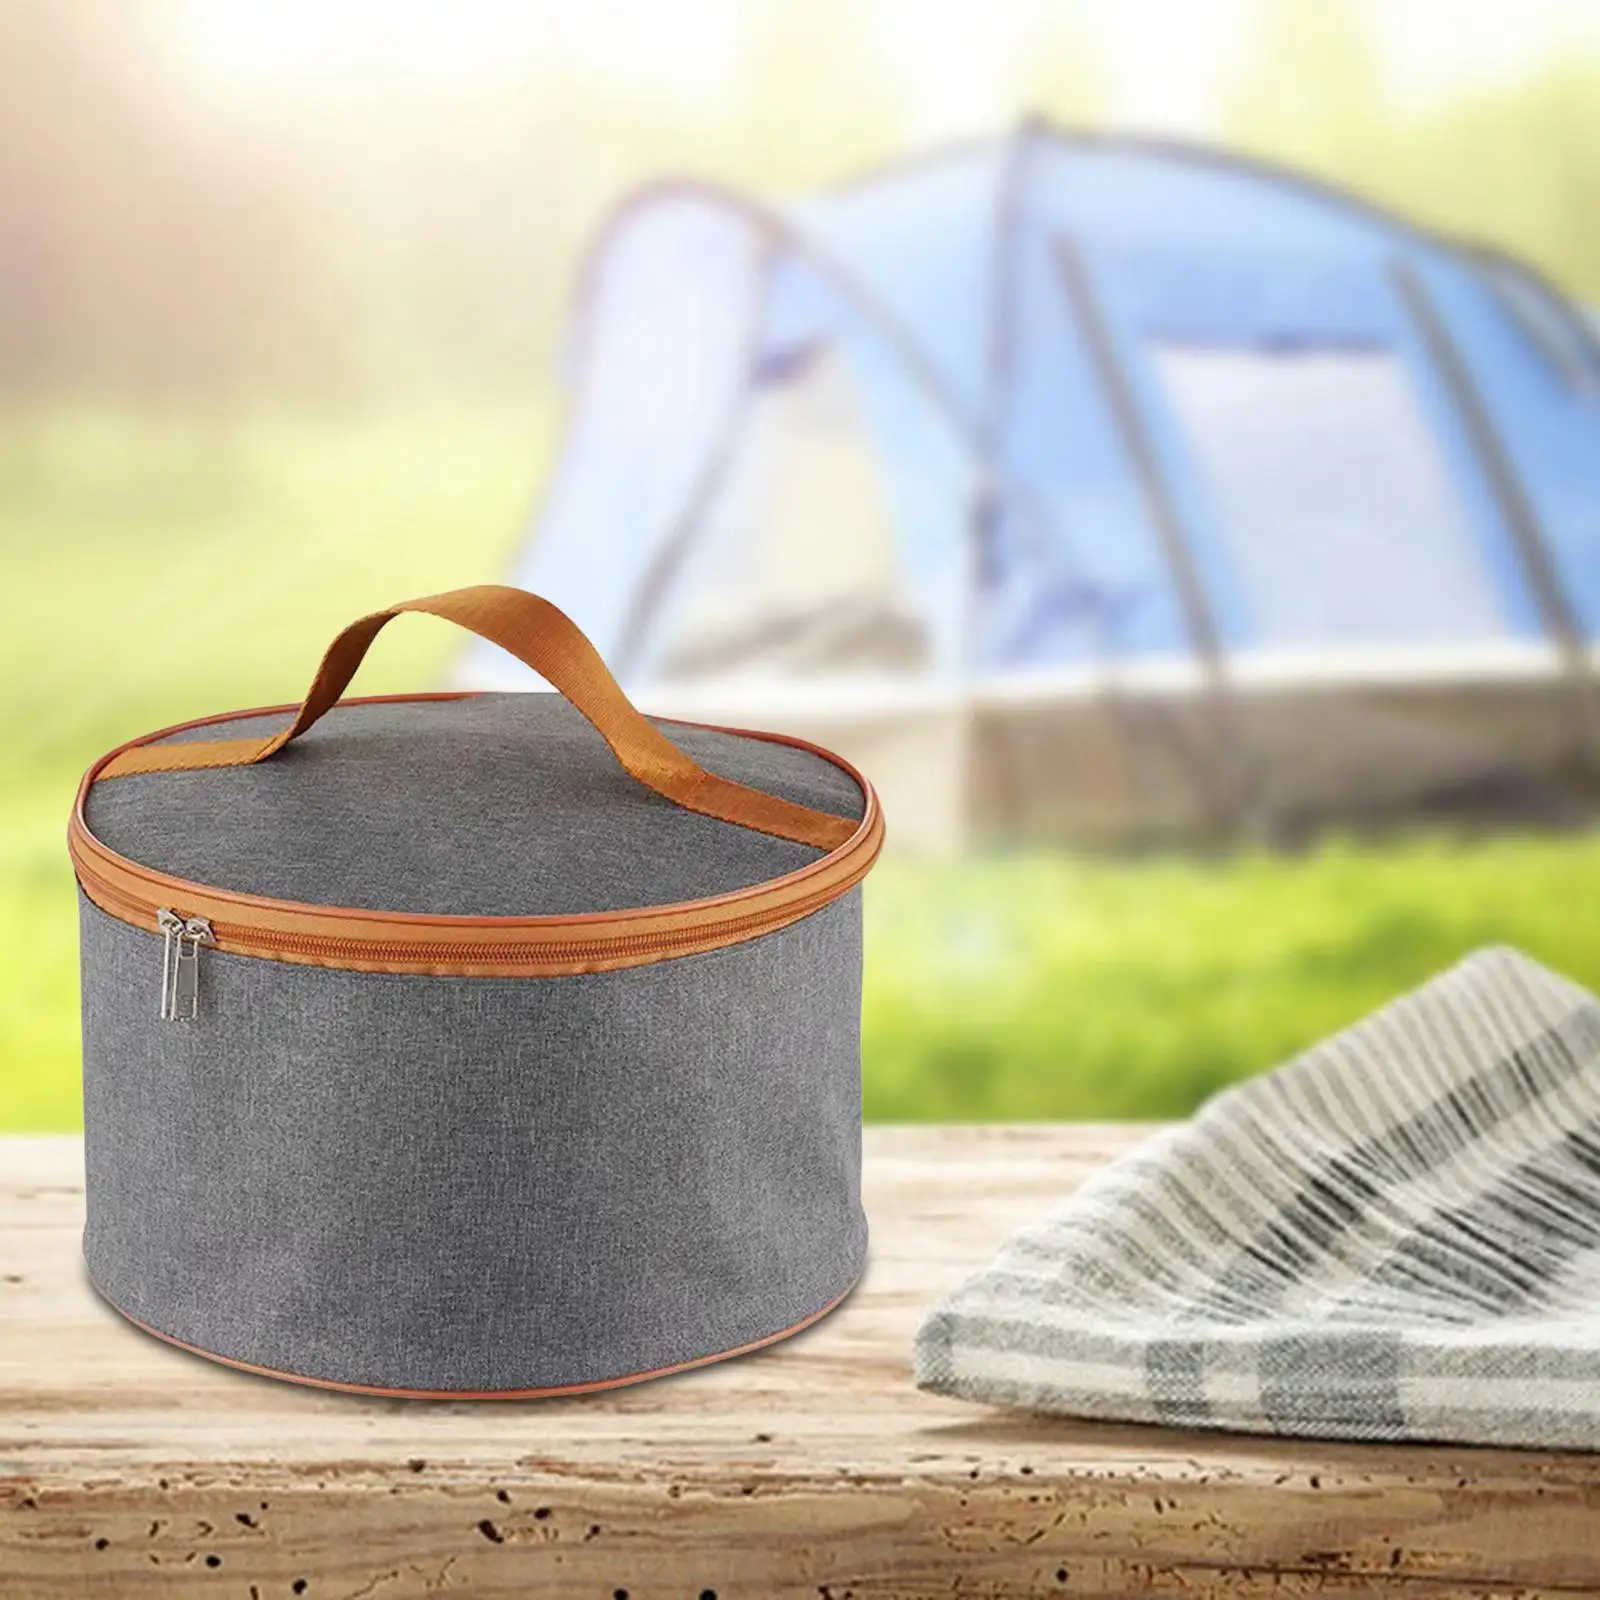 Camping Storage Bag Cooking Utensils Organizer Extra Large Carrier Bag Tableware Handbag Camping Cookware Carry Bag for Beach